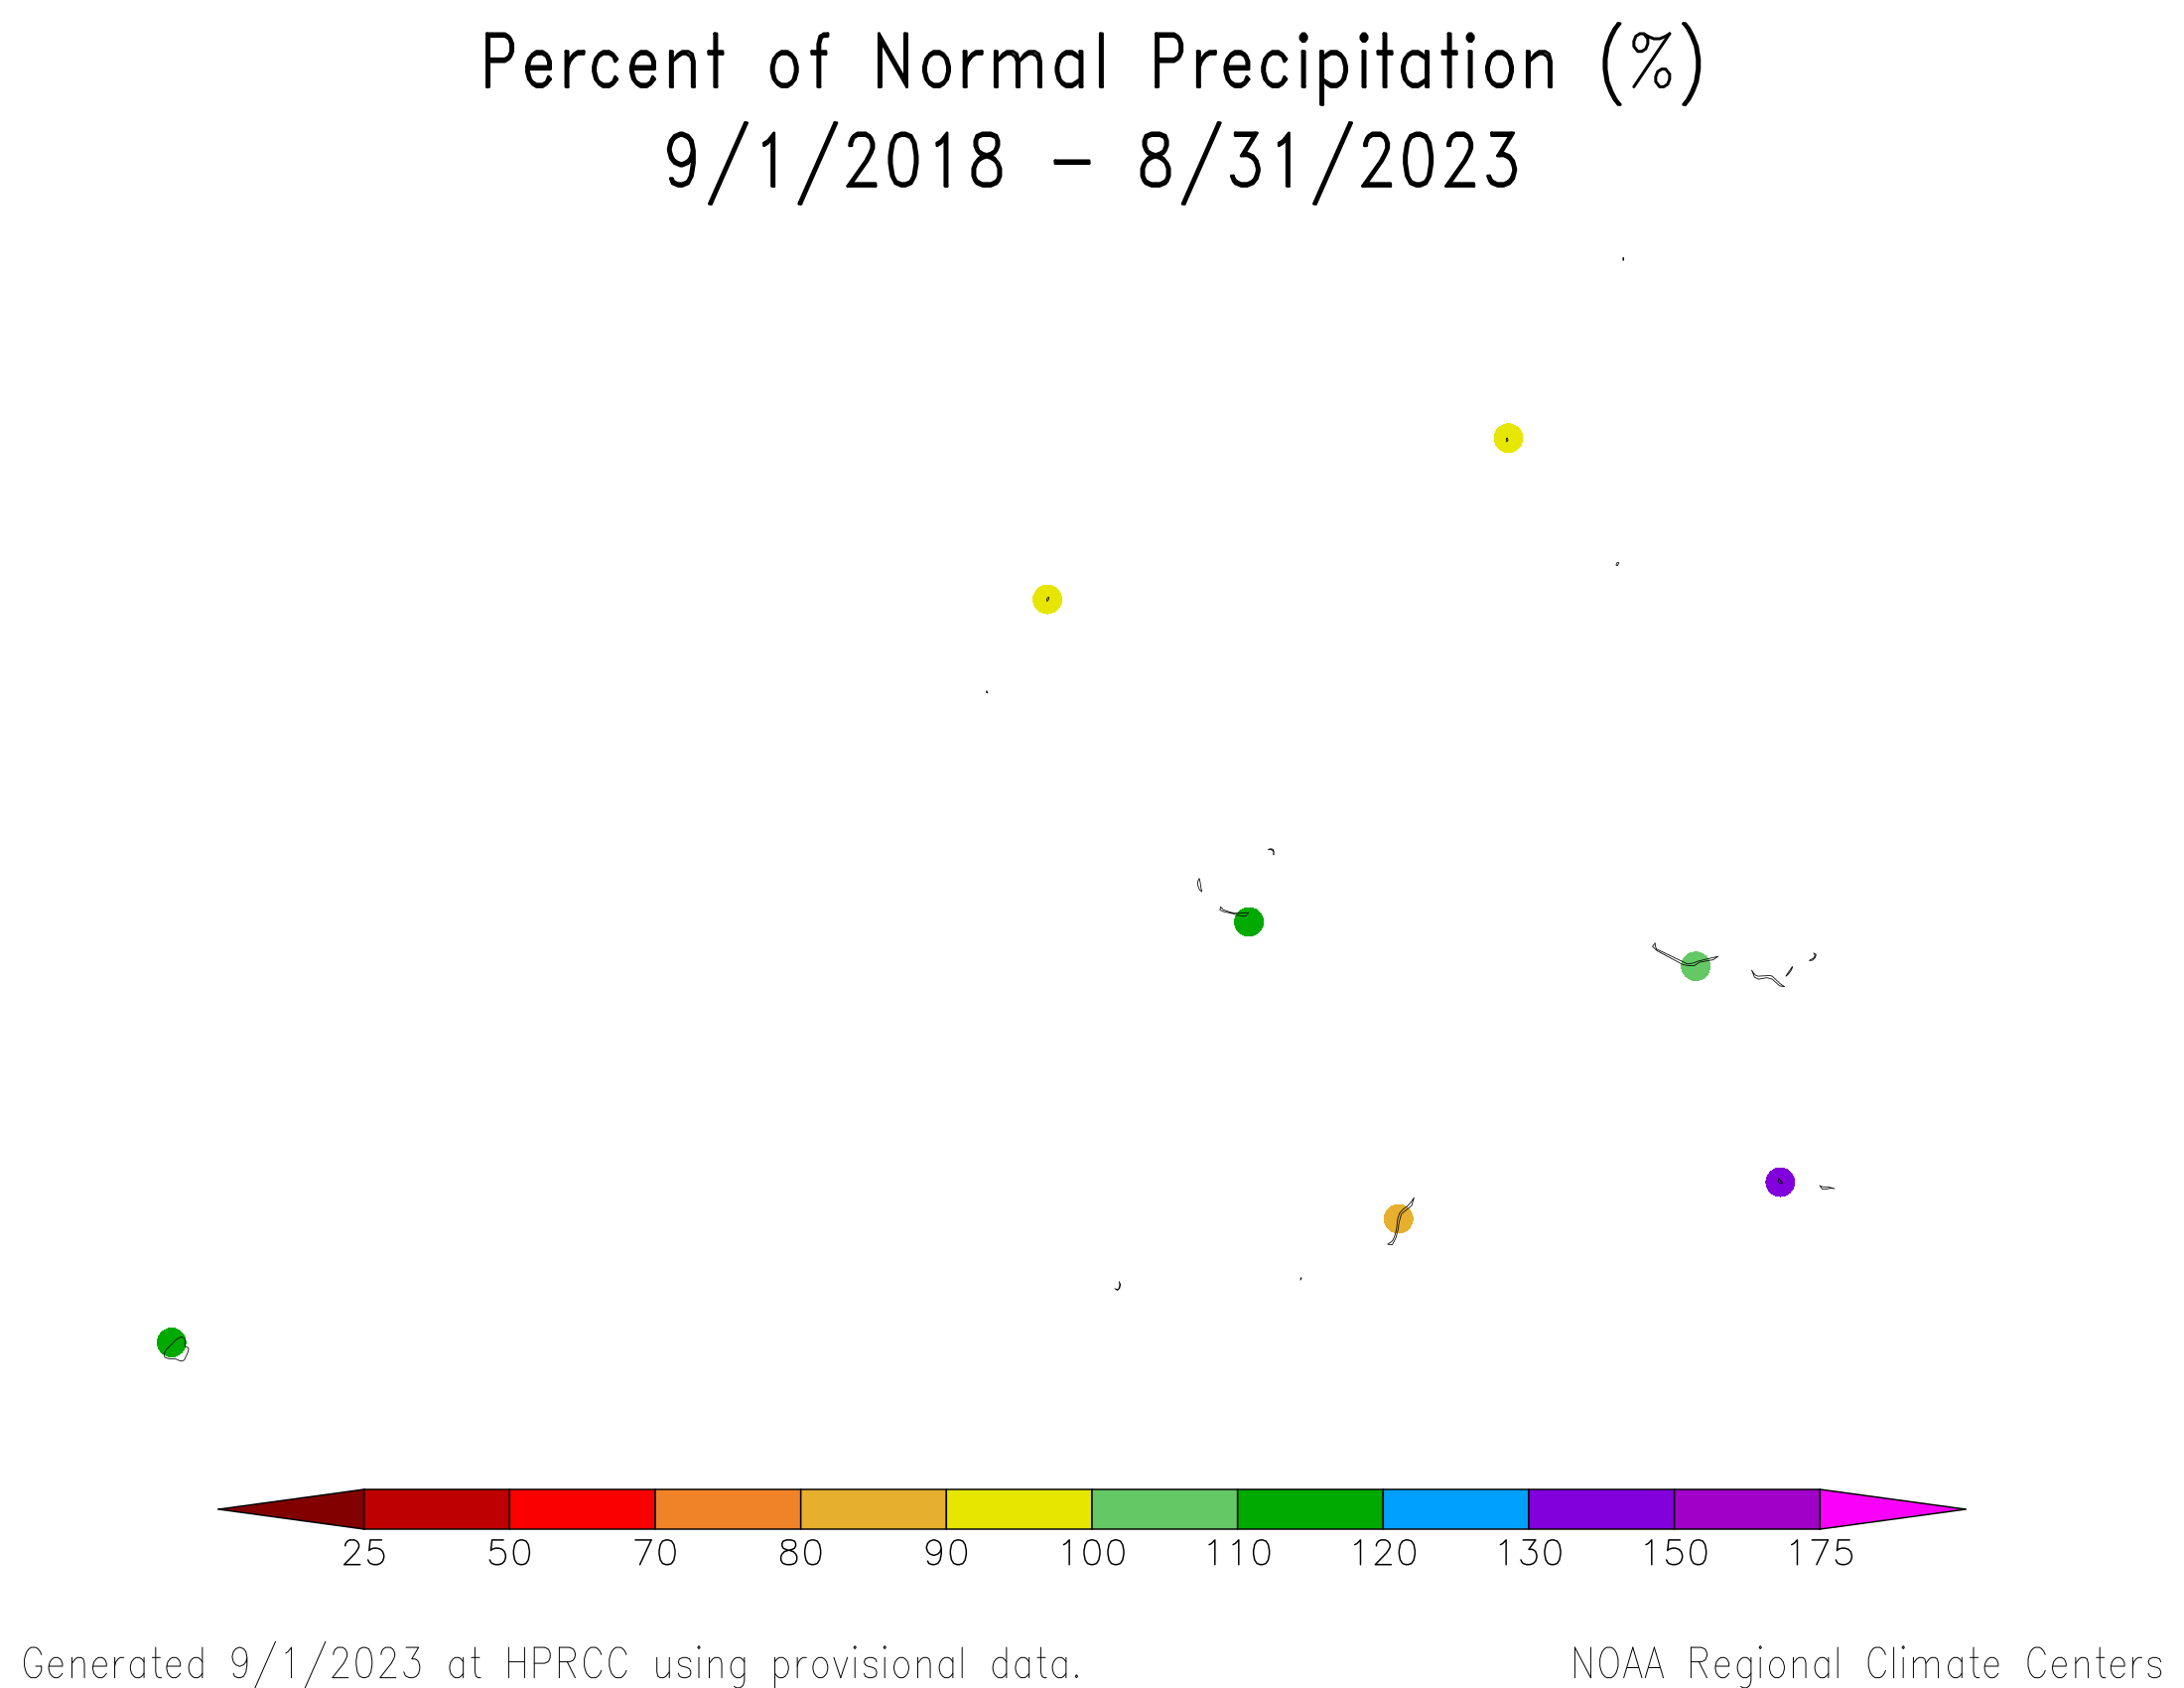 September 2018-August 2023 Percent of Normal Precipitation for the Marshall Islands